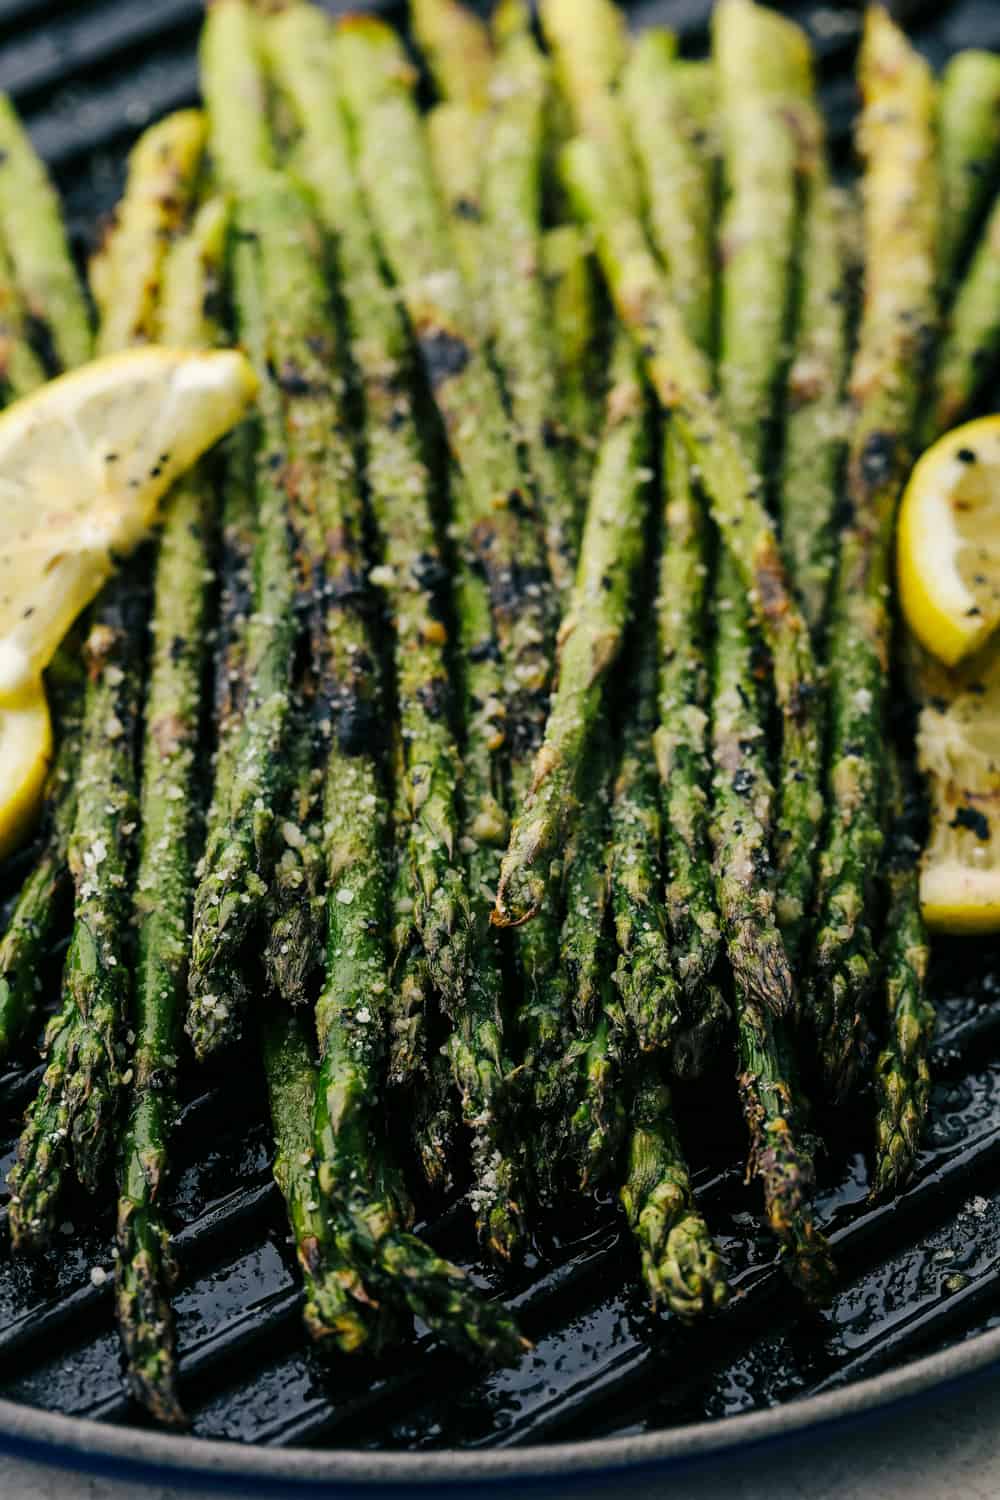 Asparagus on the grill plate with lemon wedges on the side.